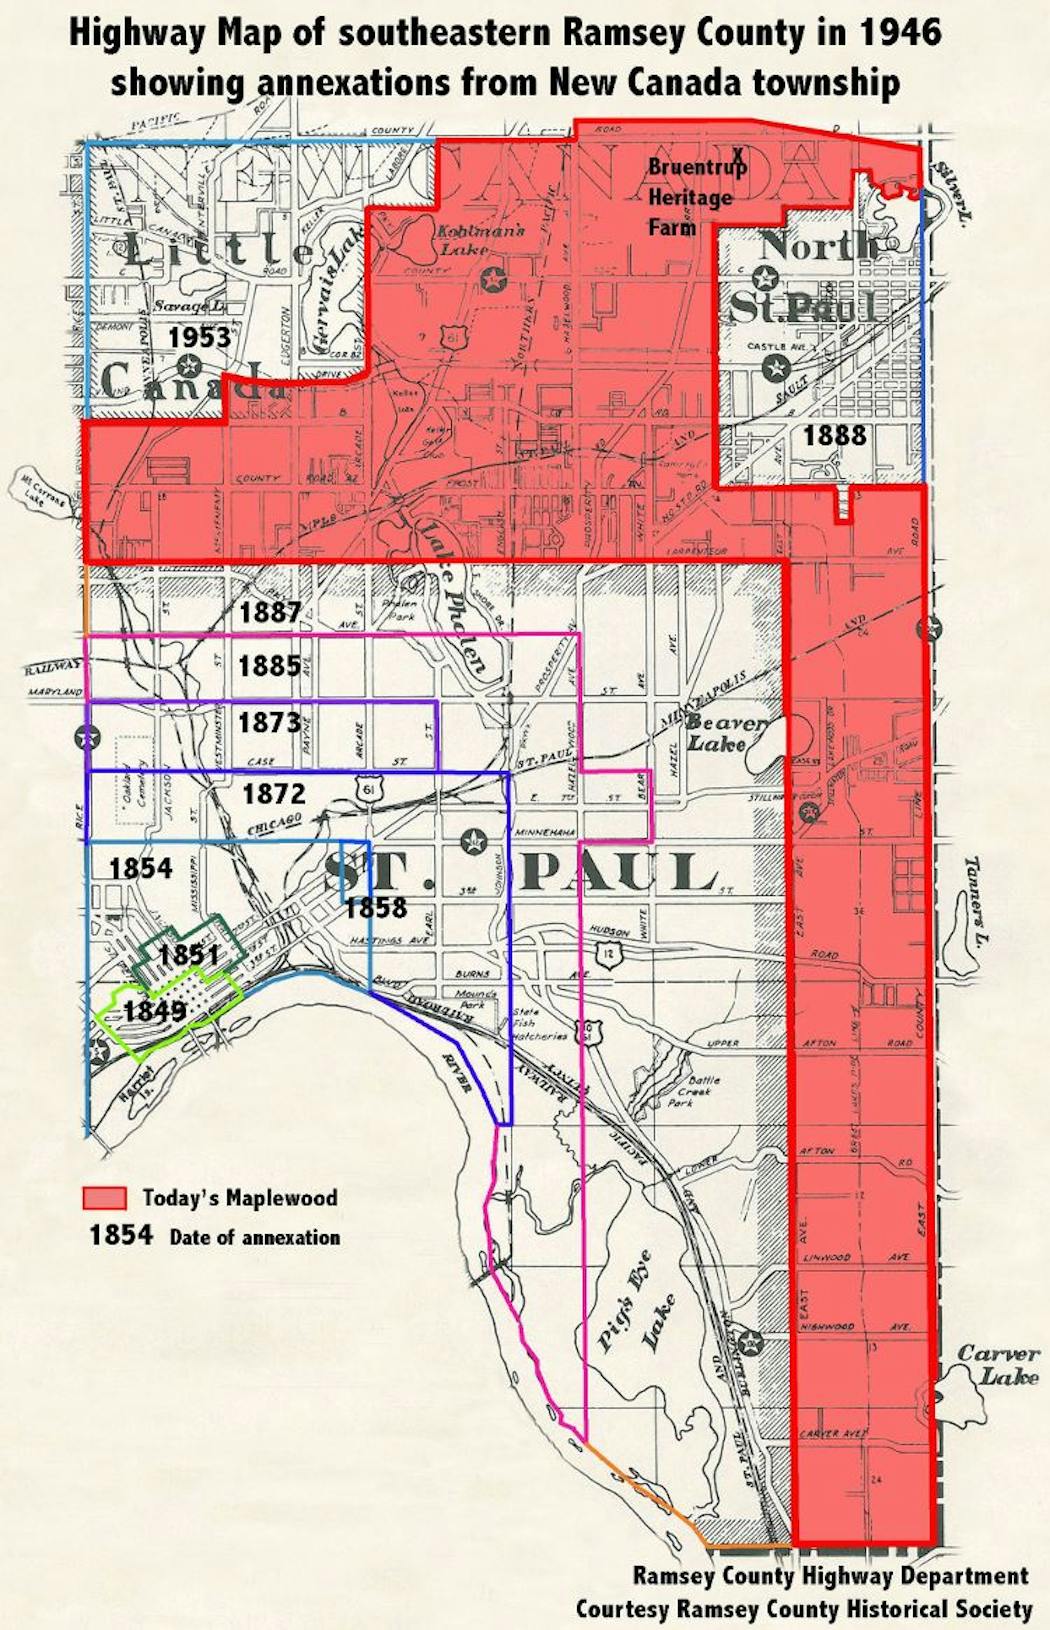 A map showing the annexations of New Canada Township.